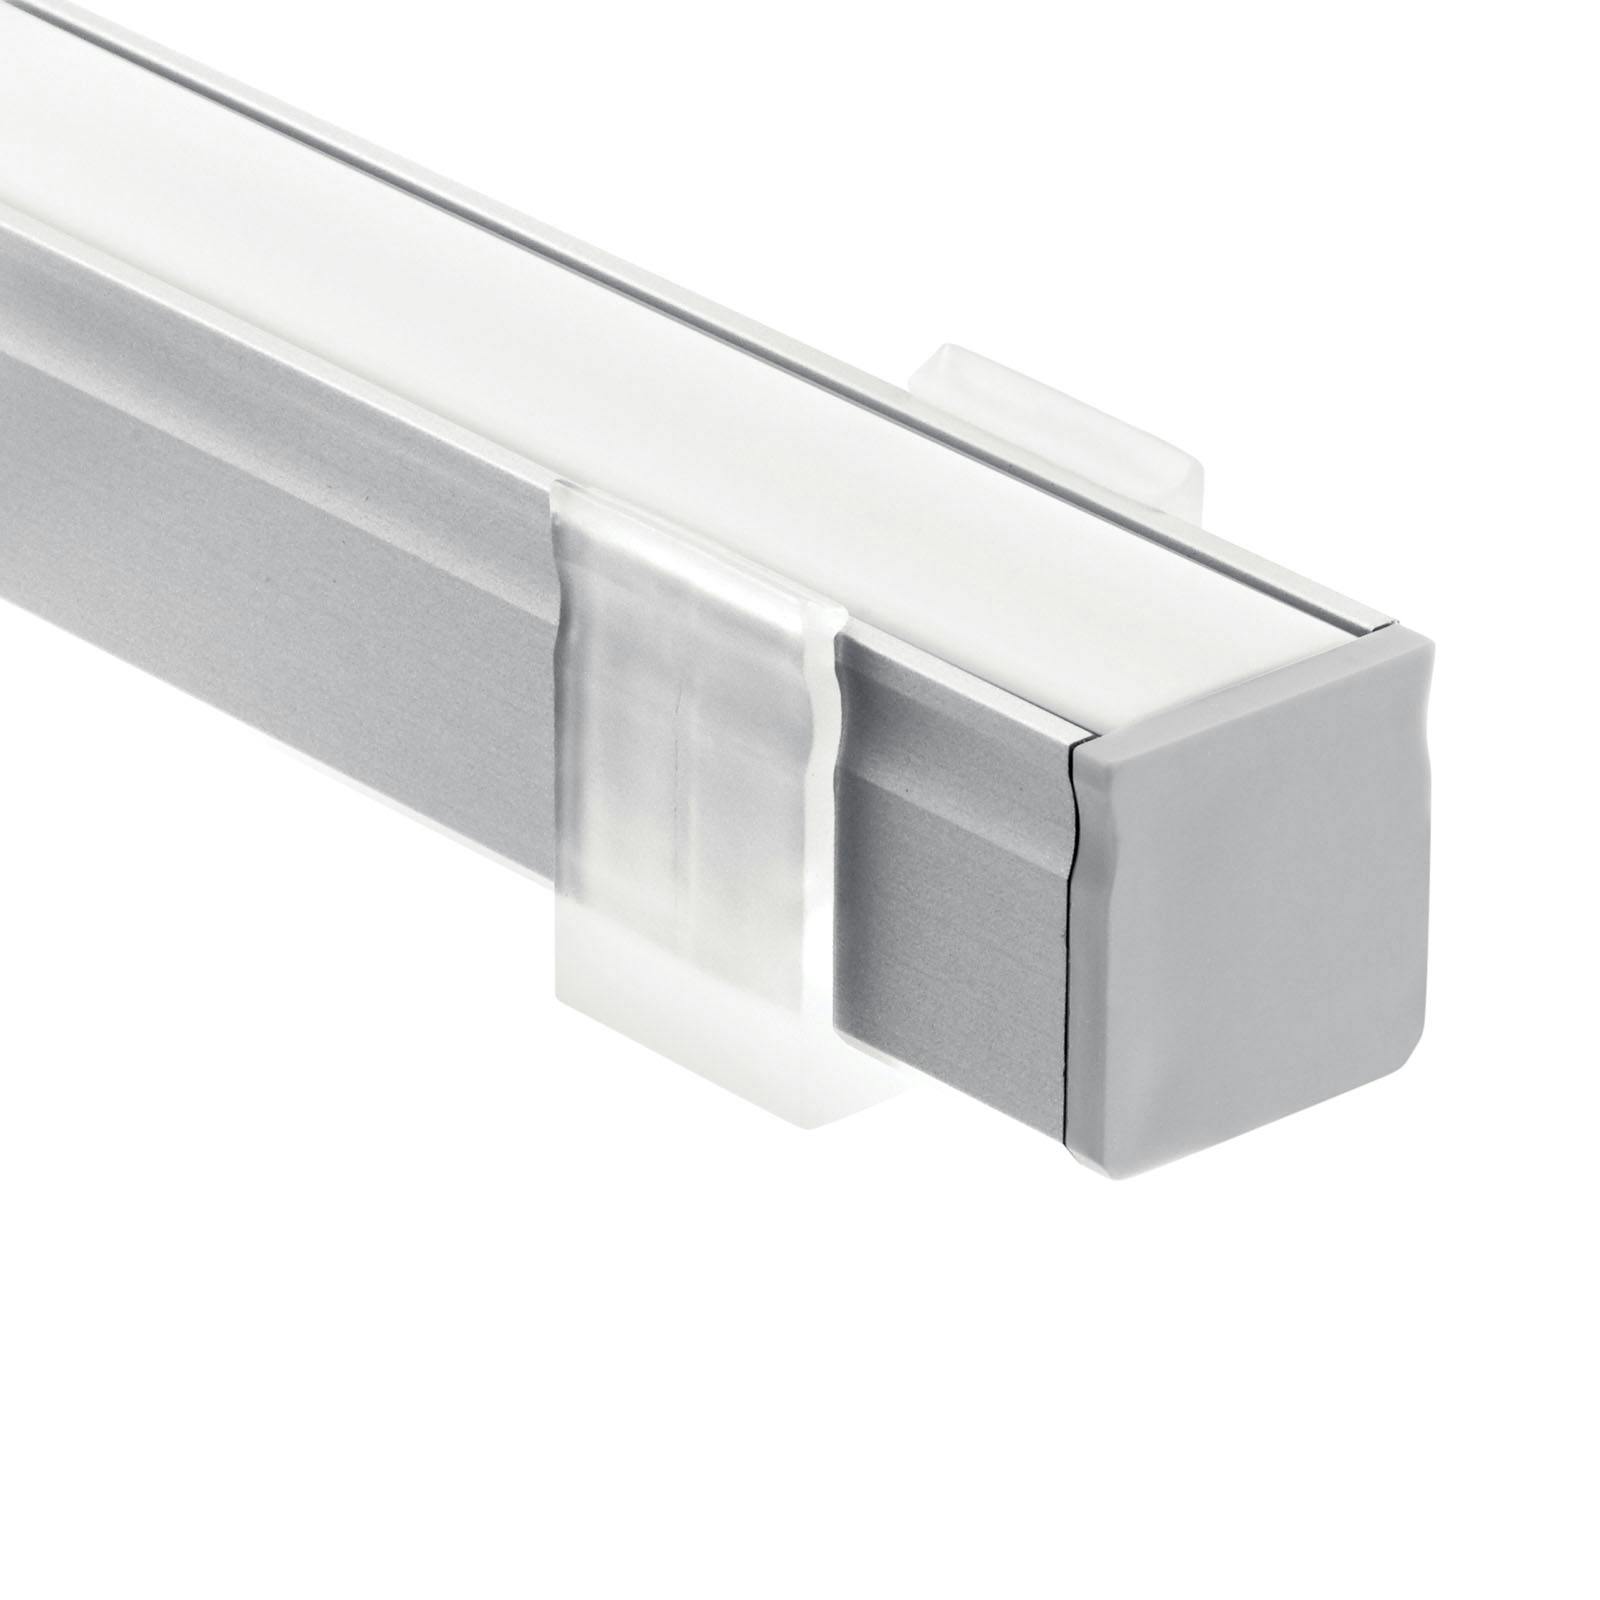 8' Kit Deep Well Surface Channel Silver on a white background